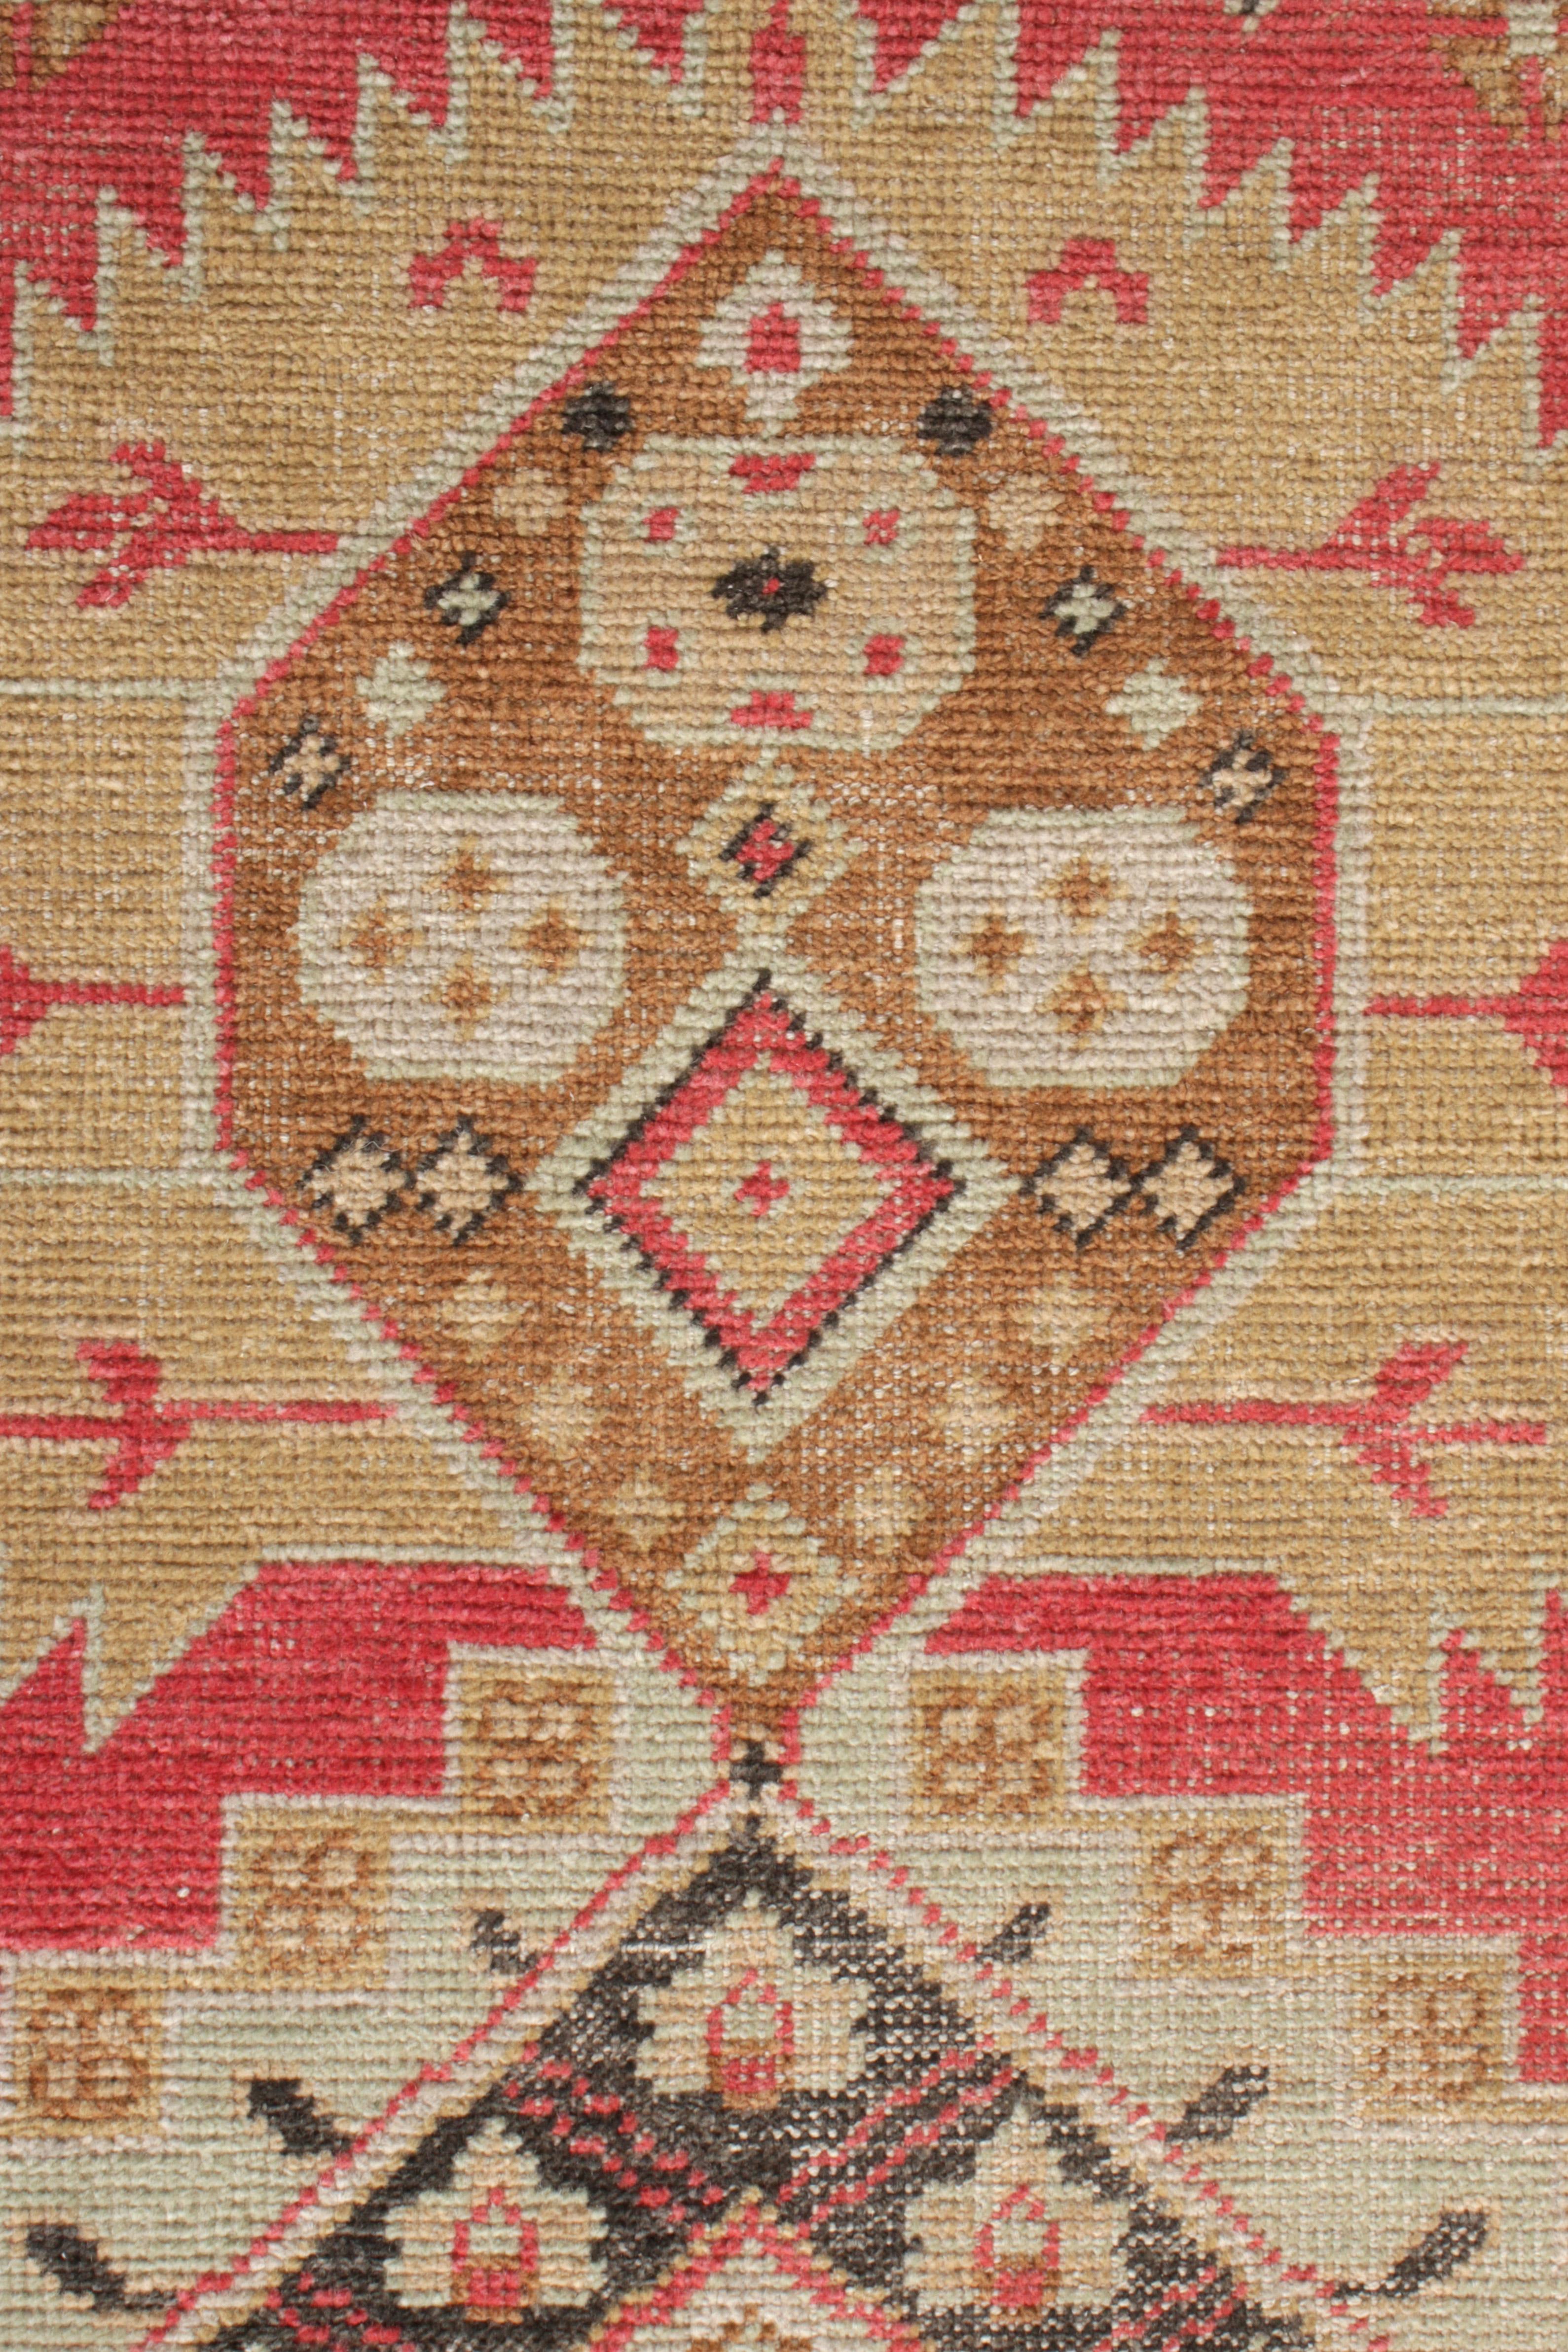 Indian Rug & Kilim’s Distressed Classic Style Rug in Red, Beige-Brown Medallion Pattern For Sale